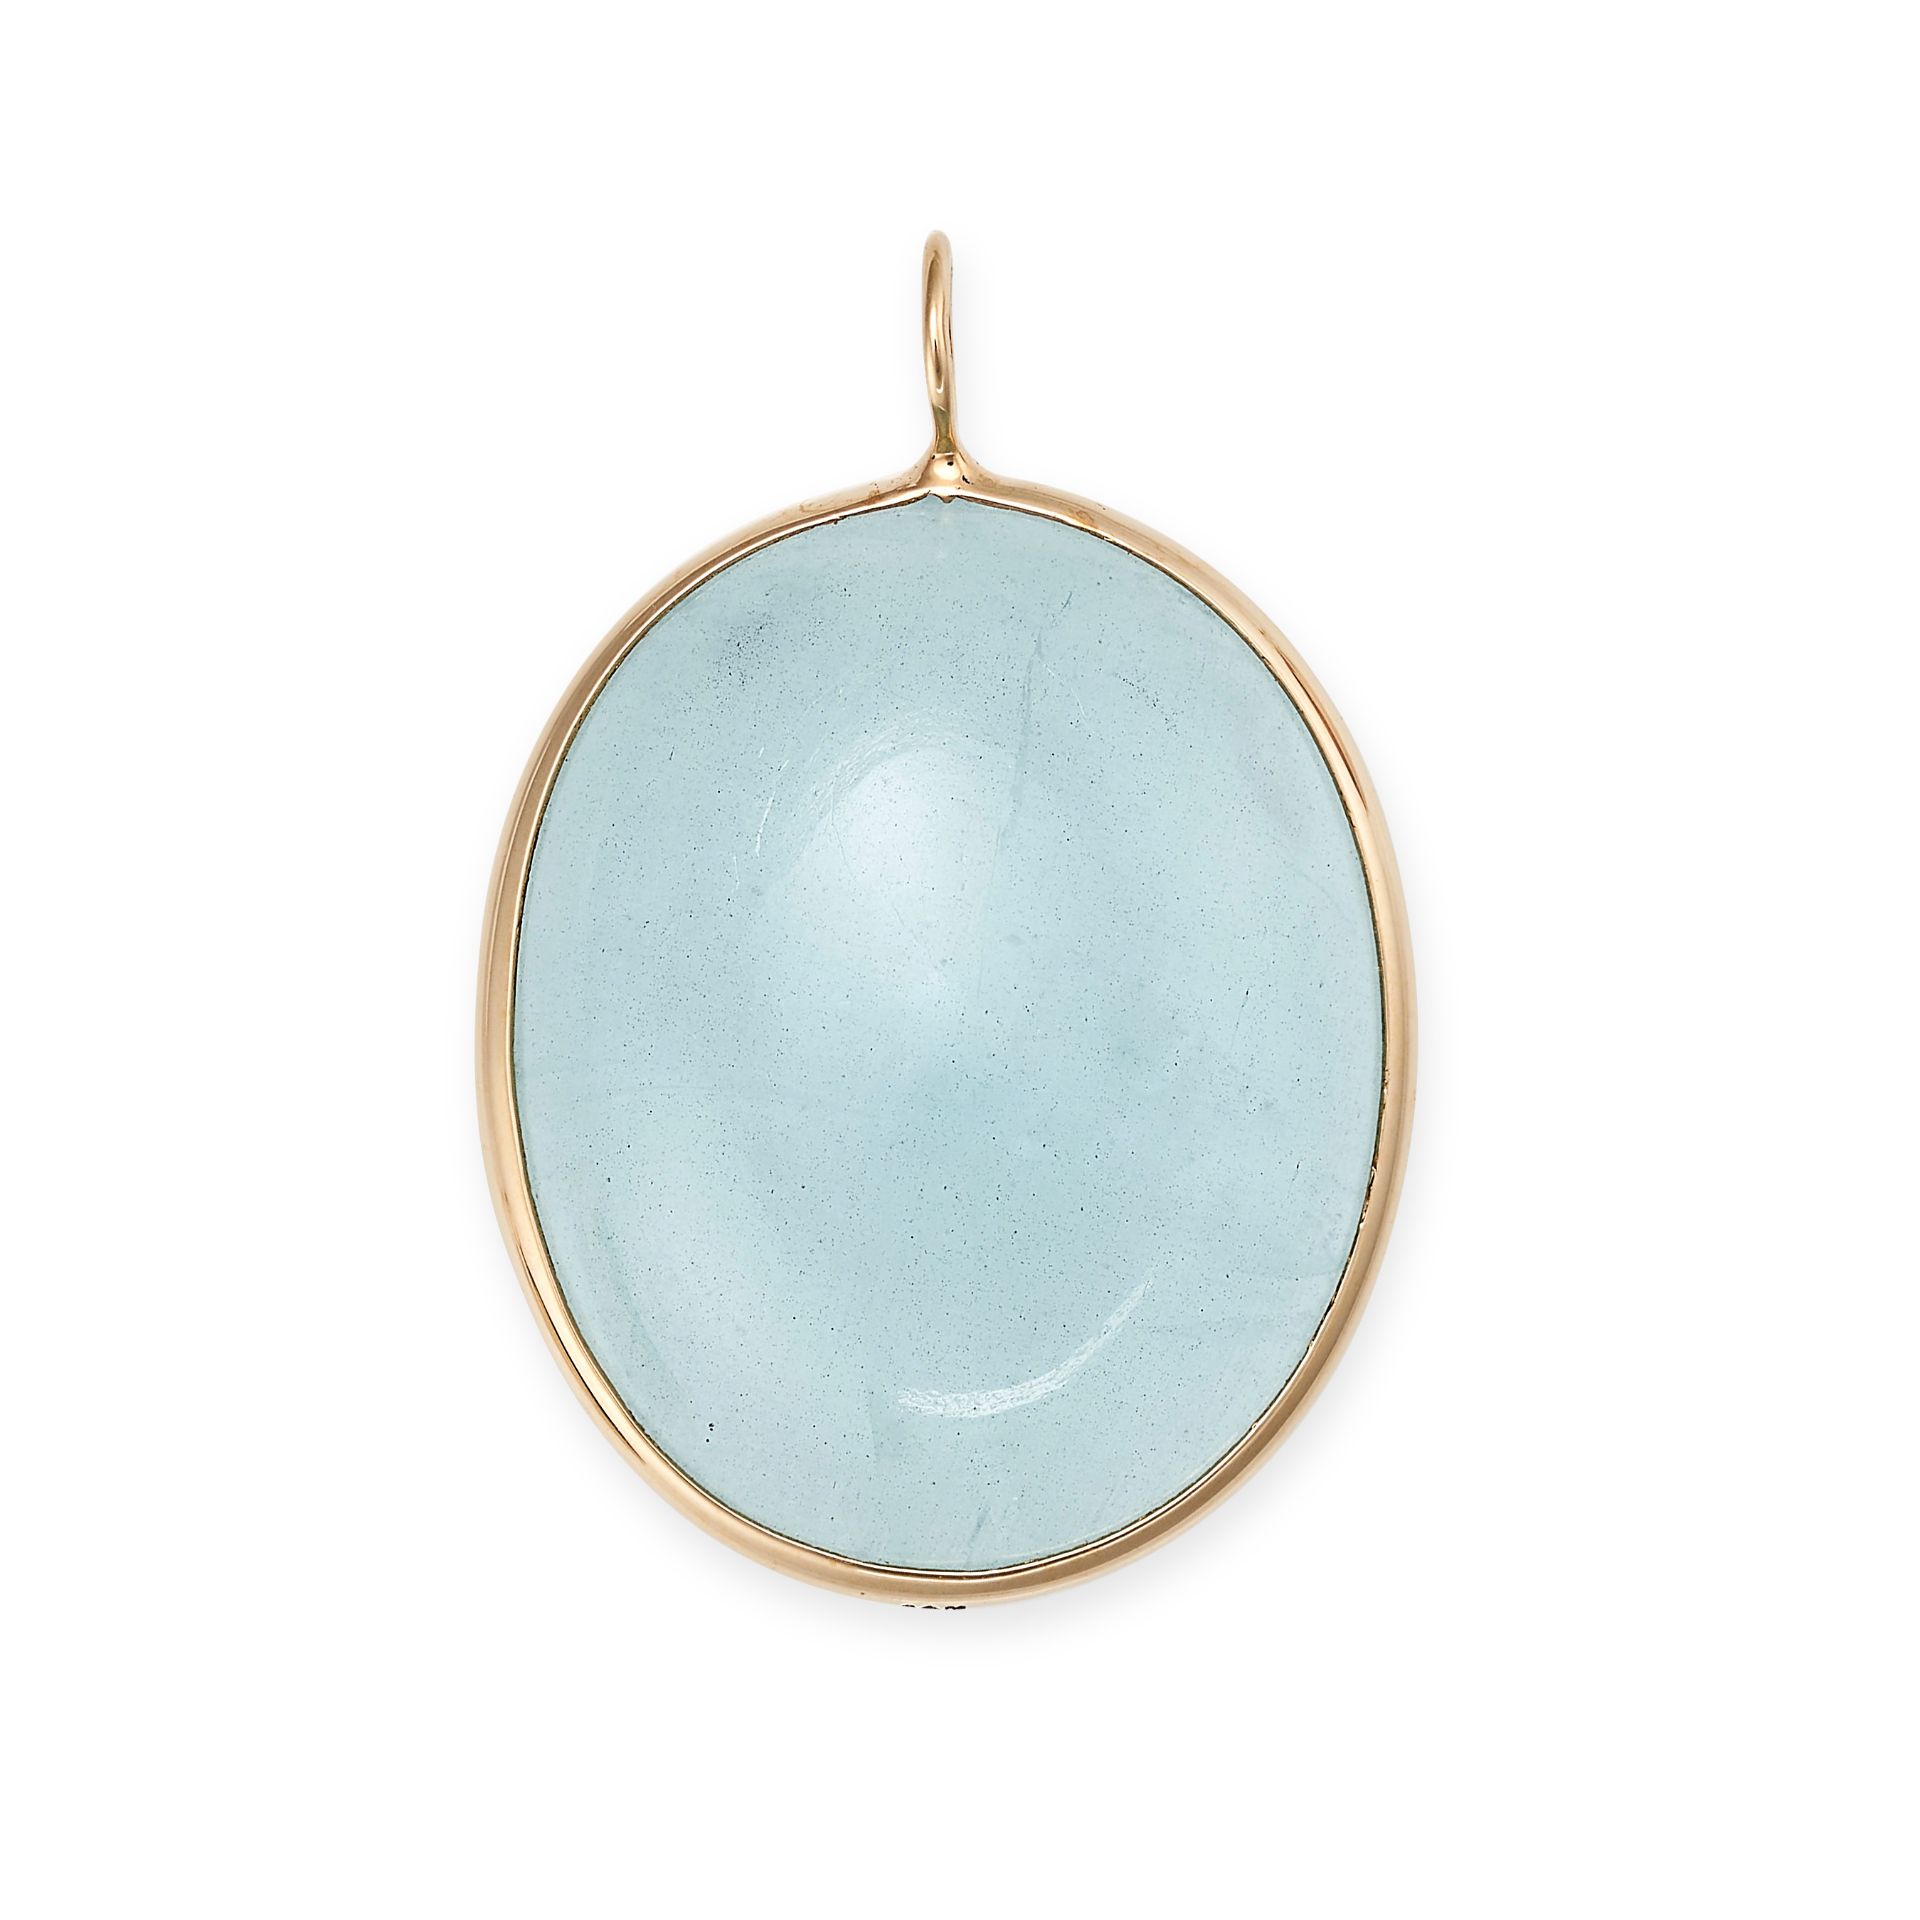 AN AQUAMARINE PENDANT in 14ct yellow gold, set with an oval cabochon aquamarine of 16.75 carats, ...